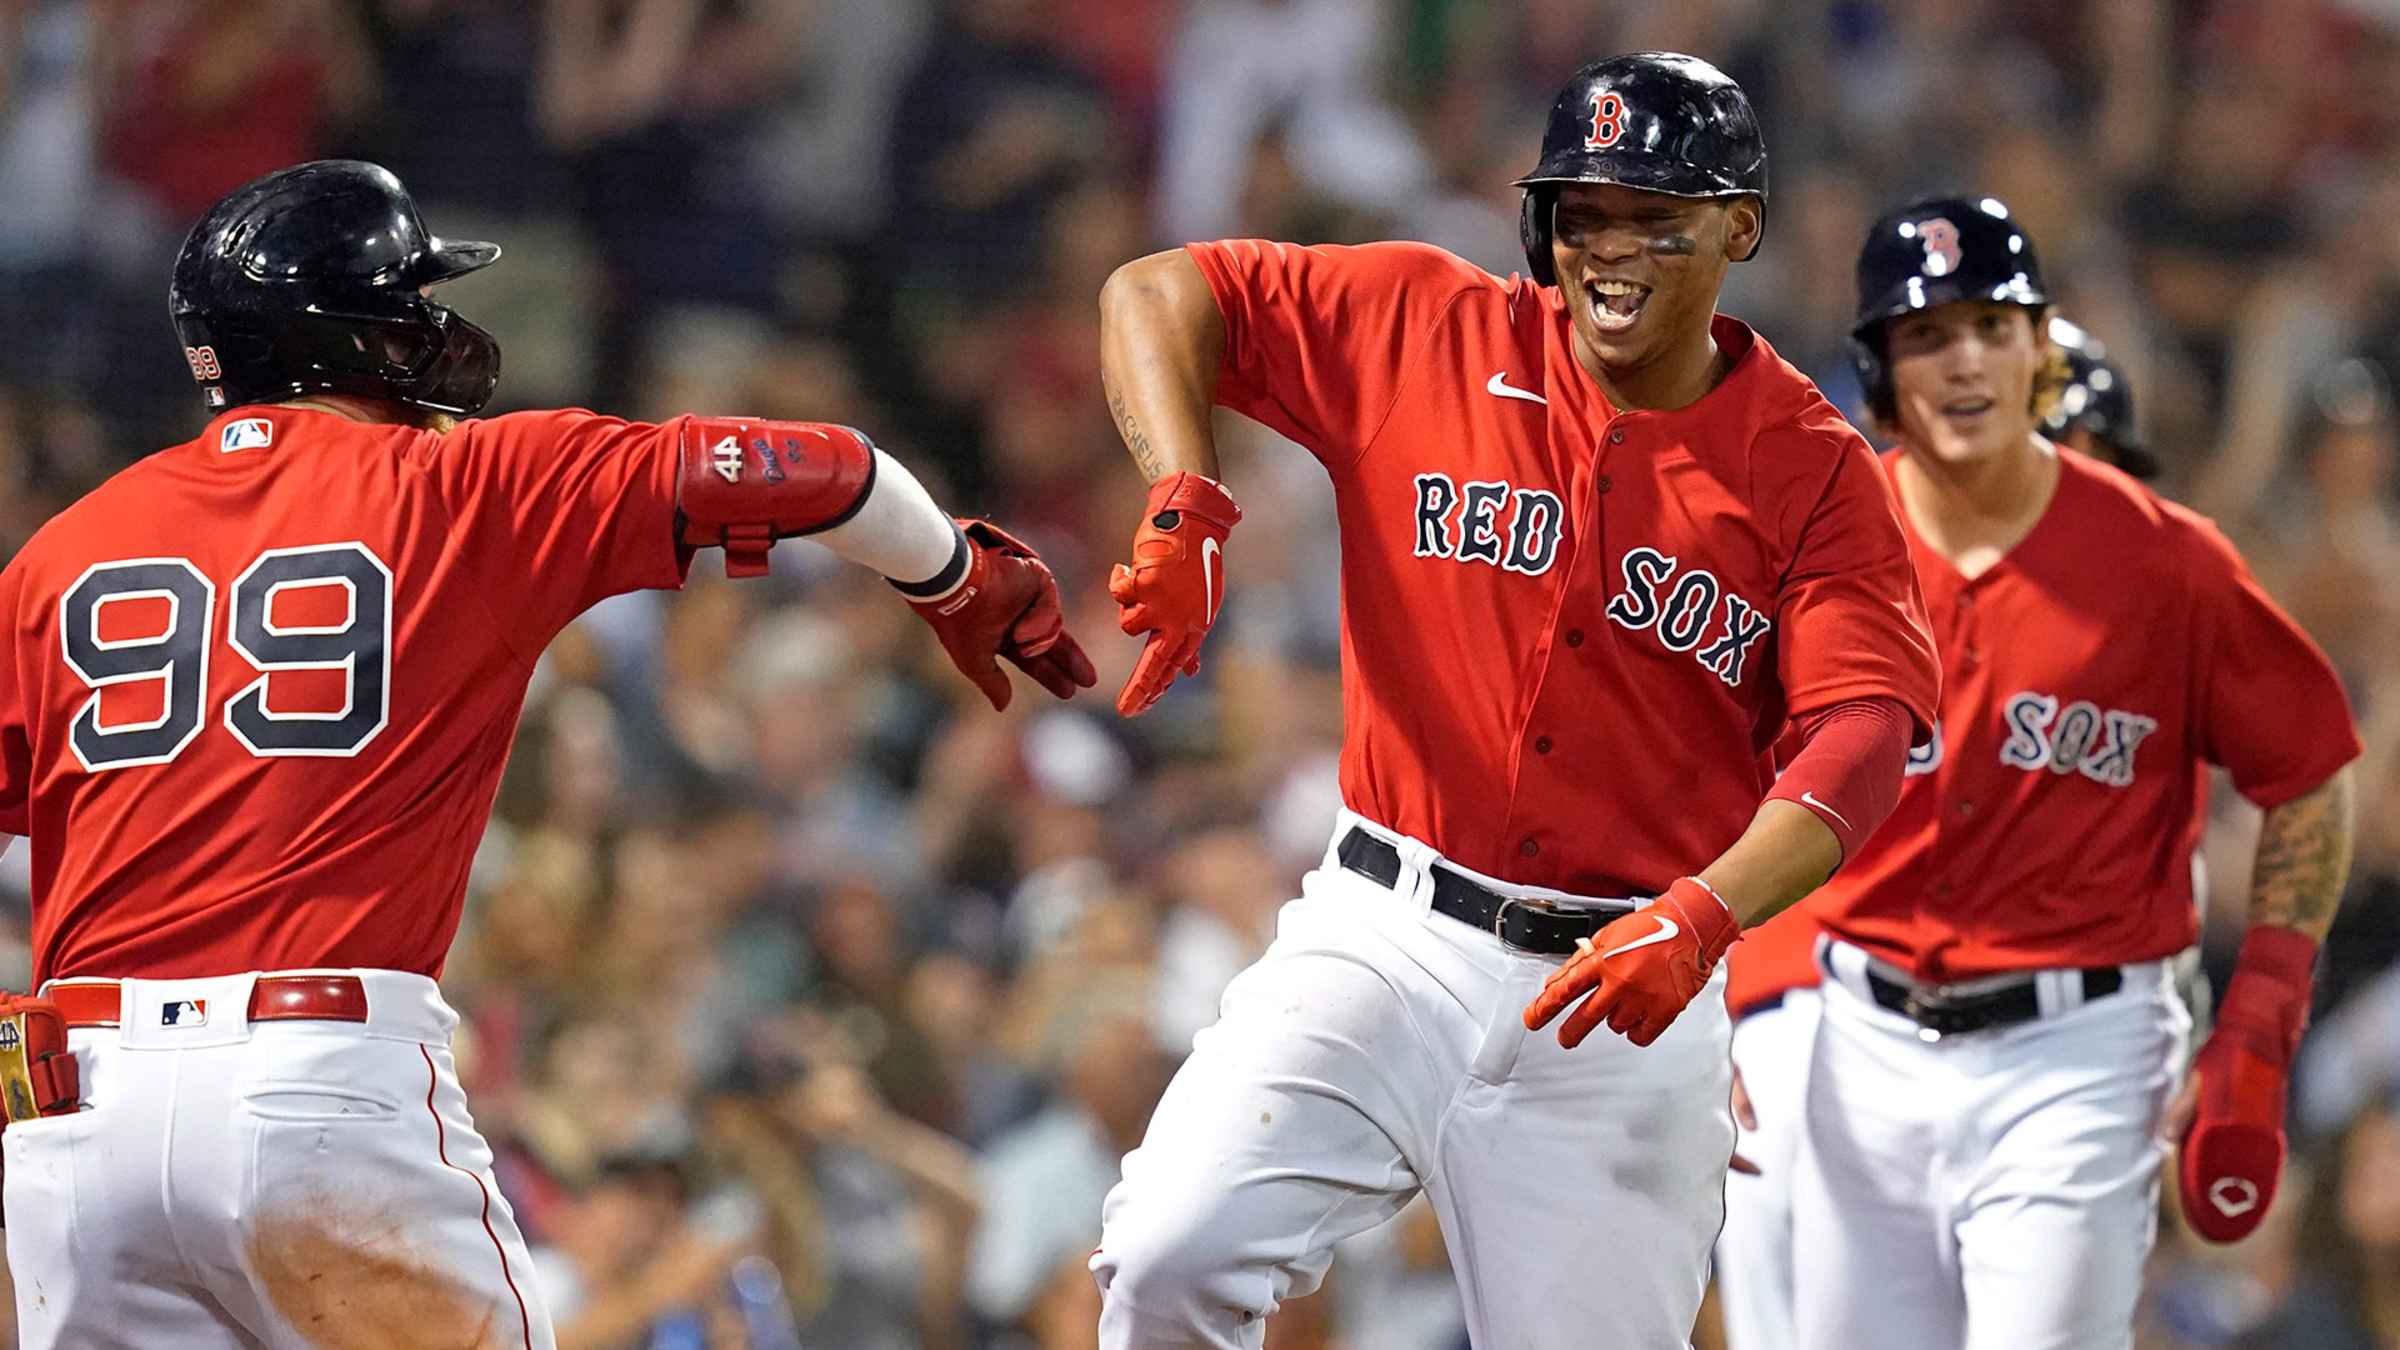 Red Sox on X: UPDATE: Raffy has just crushed his second HR of the